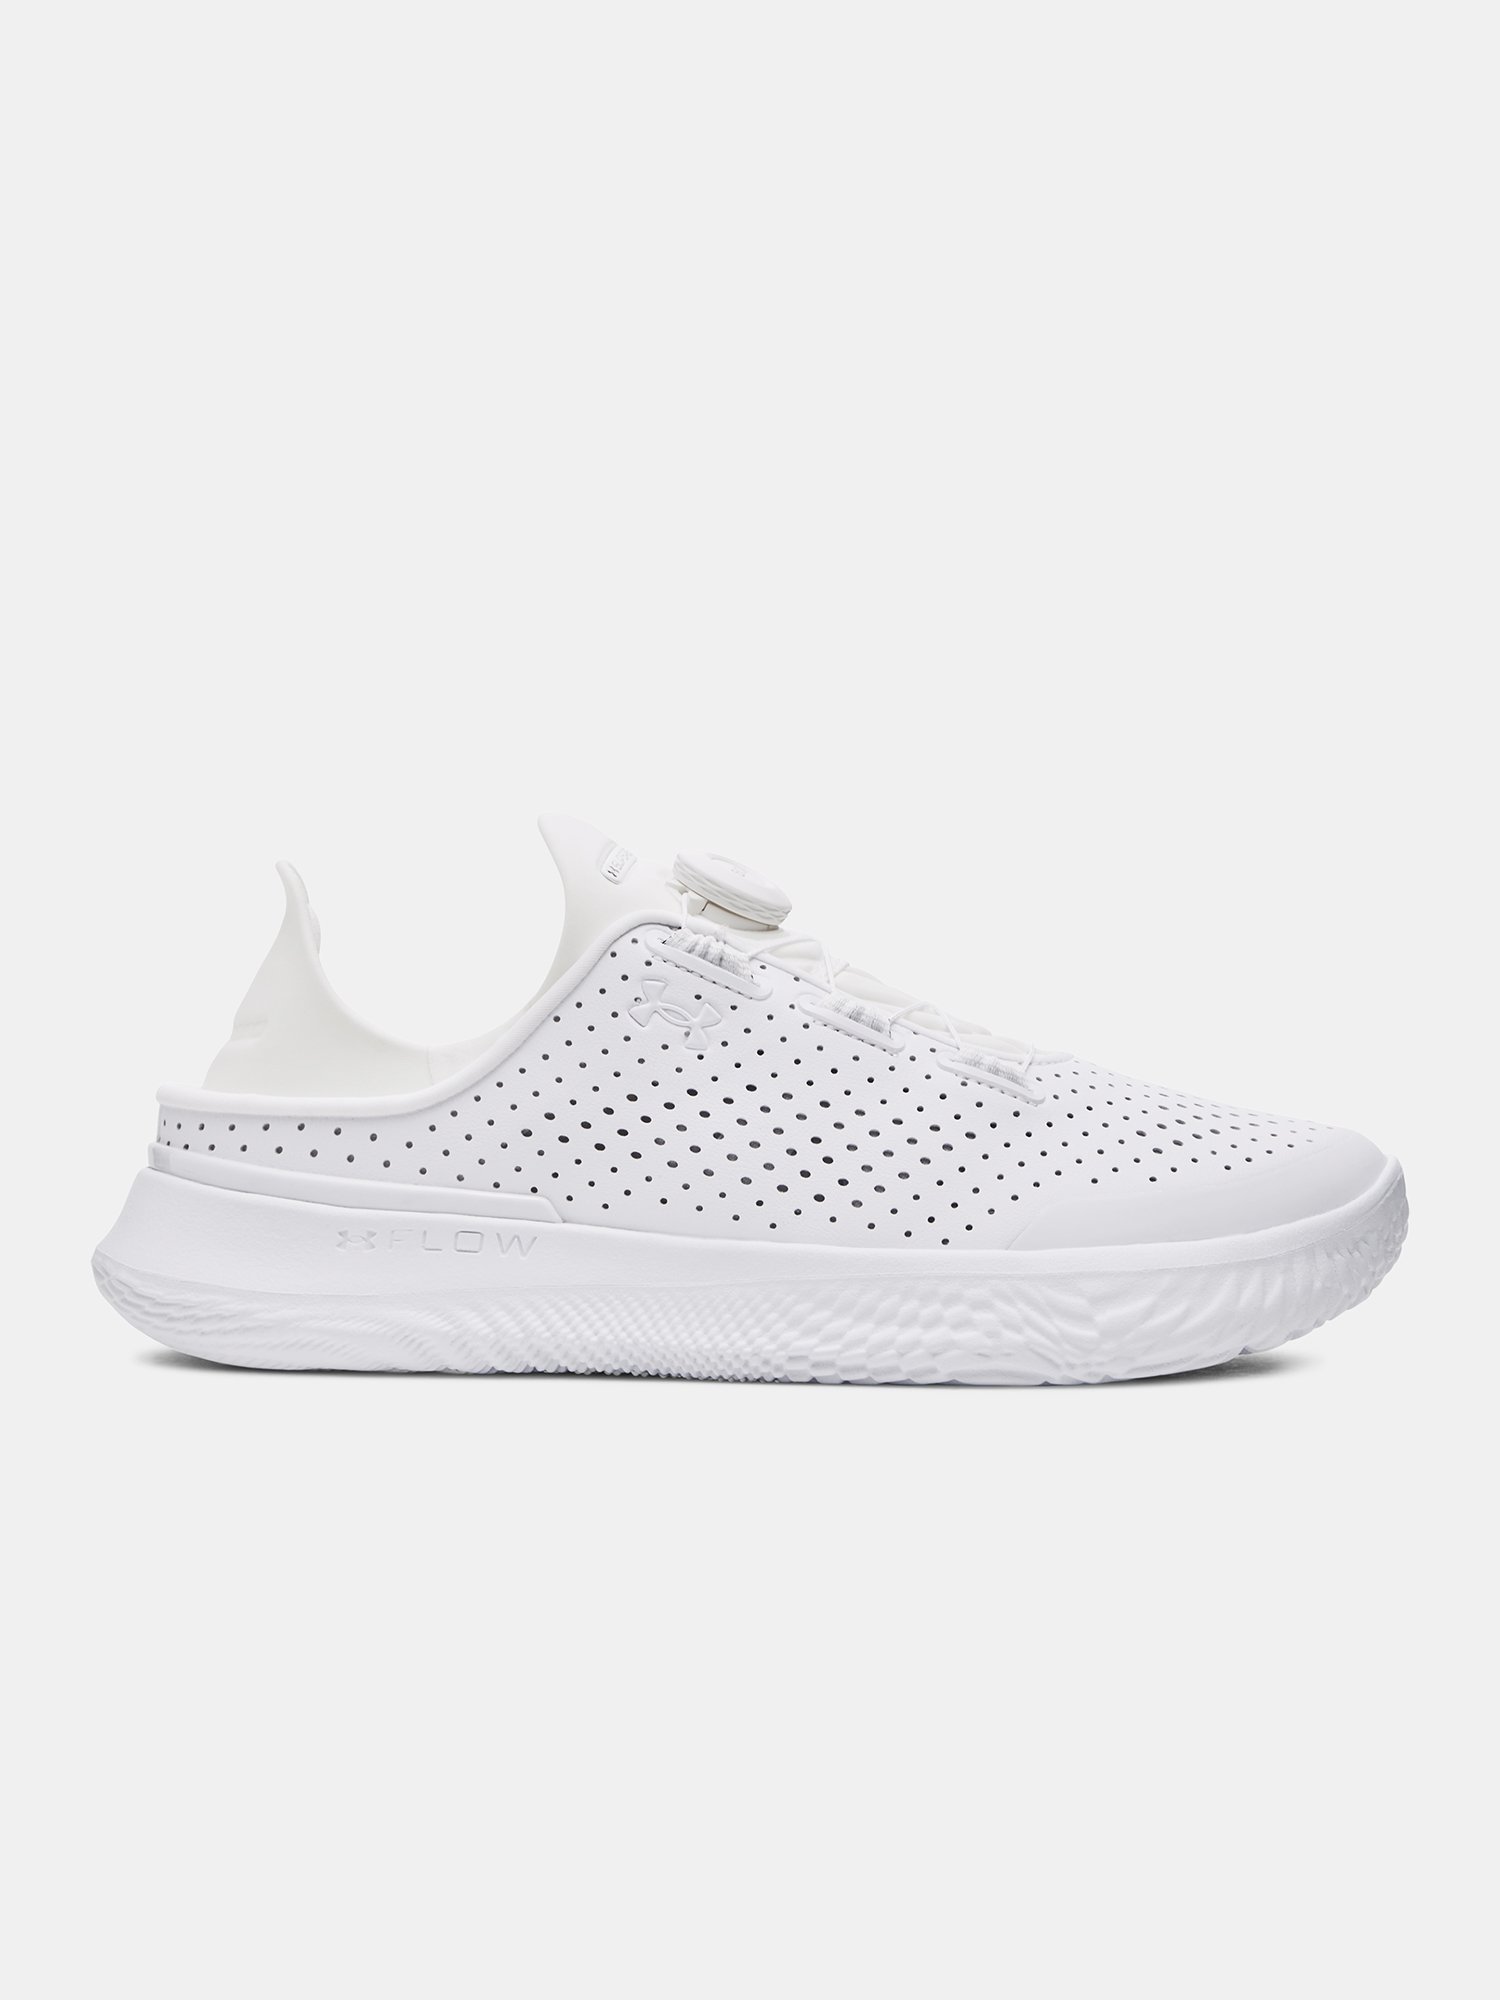 Topánky Under Armour UA Slipspeed Trainer SYN-WHT